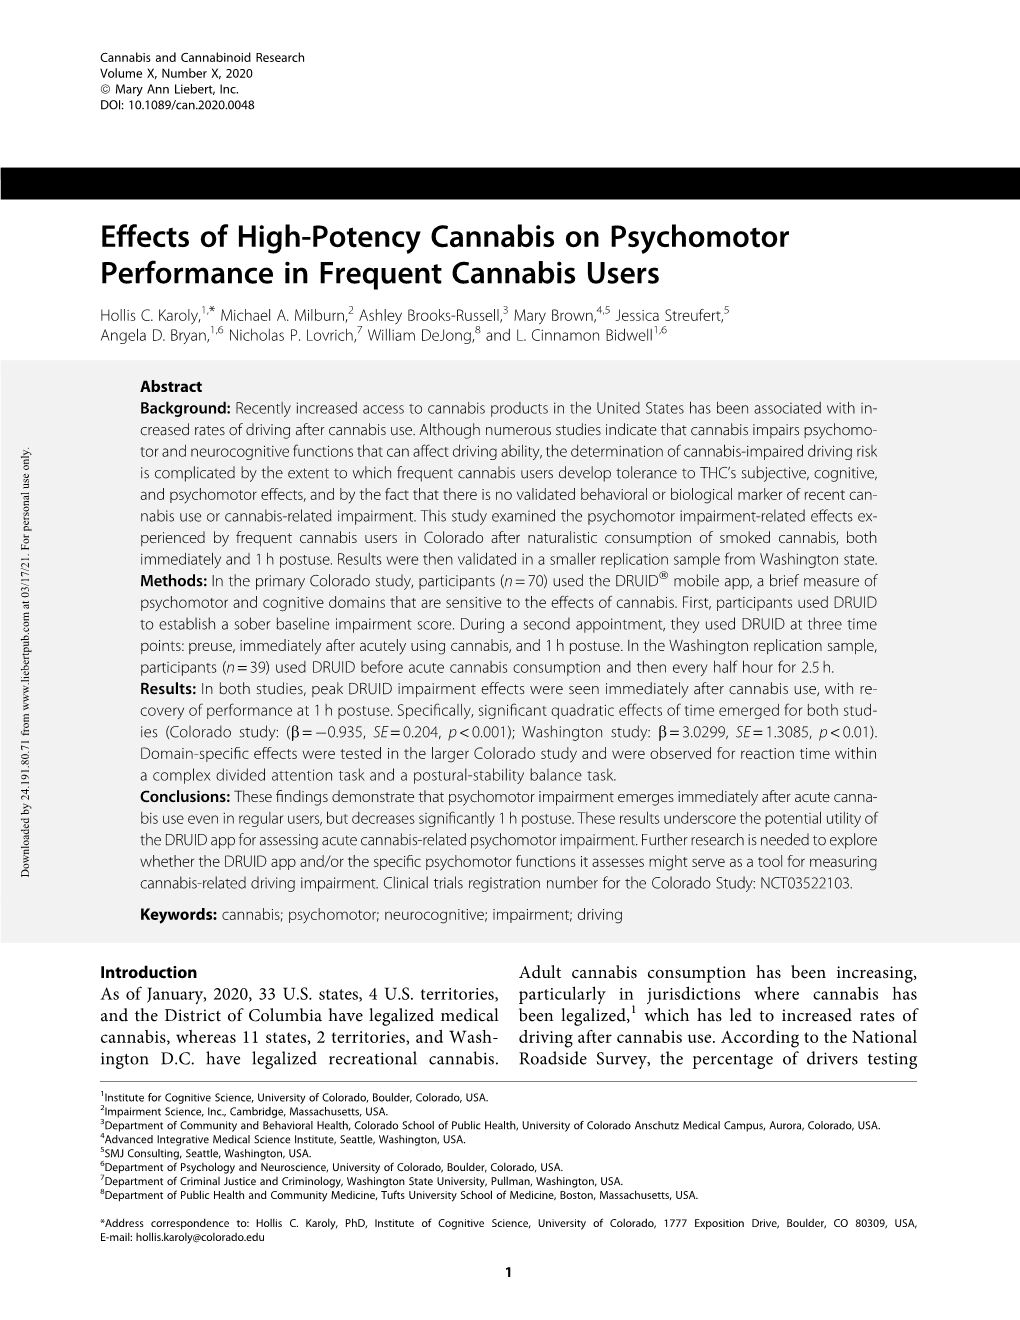 Effects of High-Potency Cannabis on Psychomotor Performance in Frequent Cannabis Users